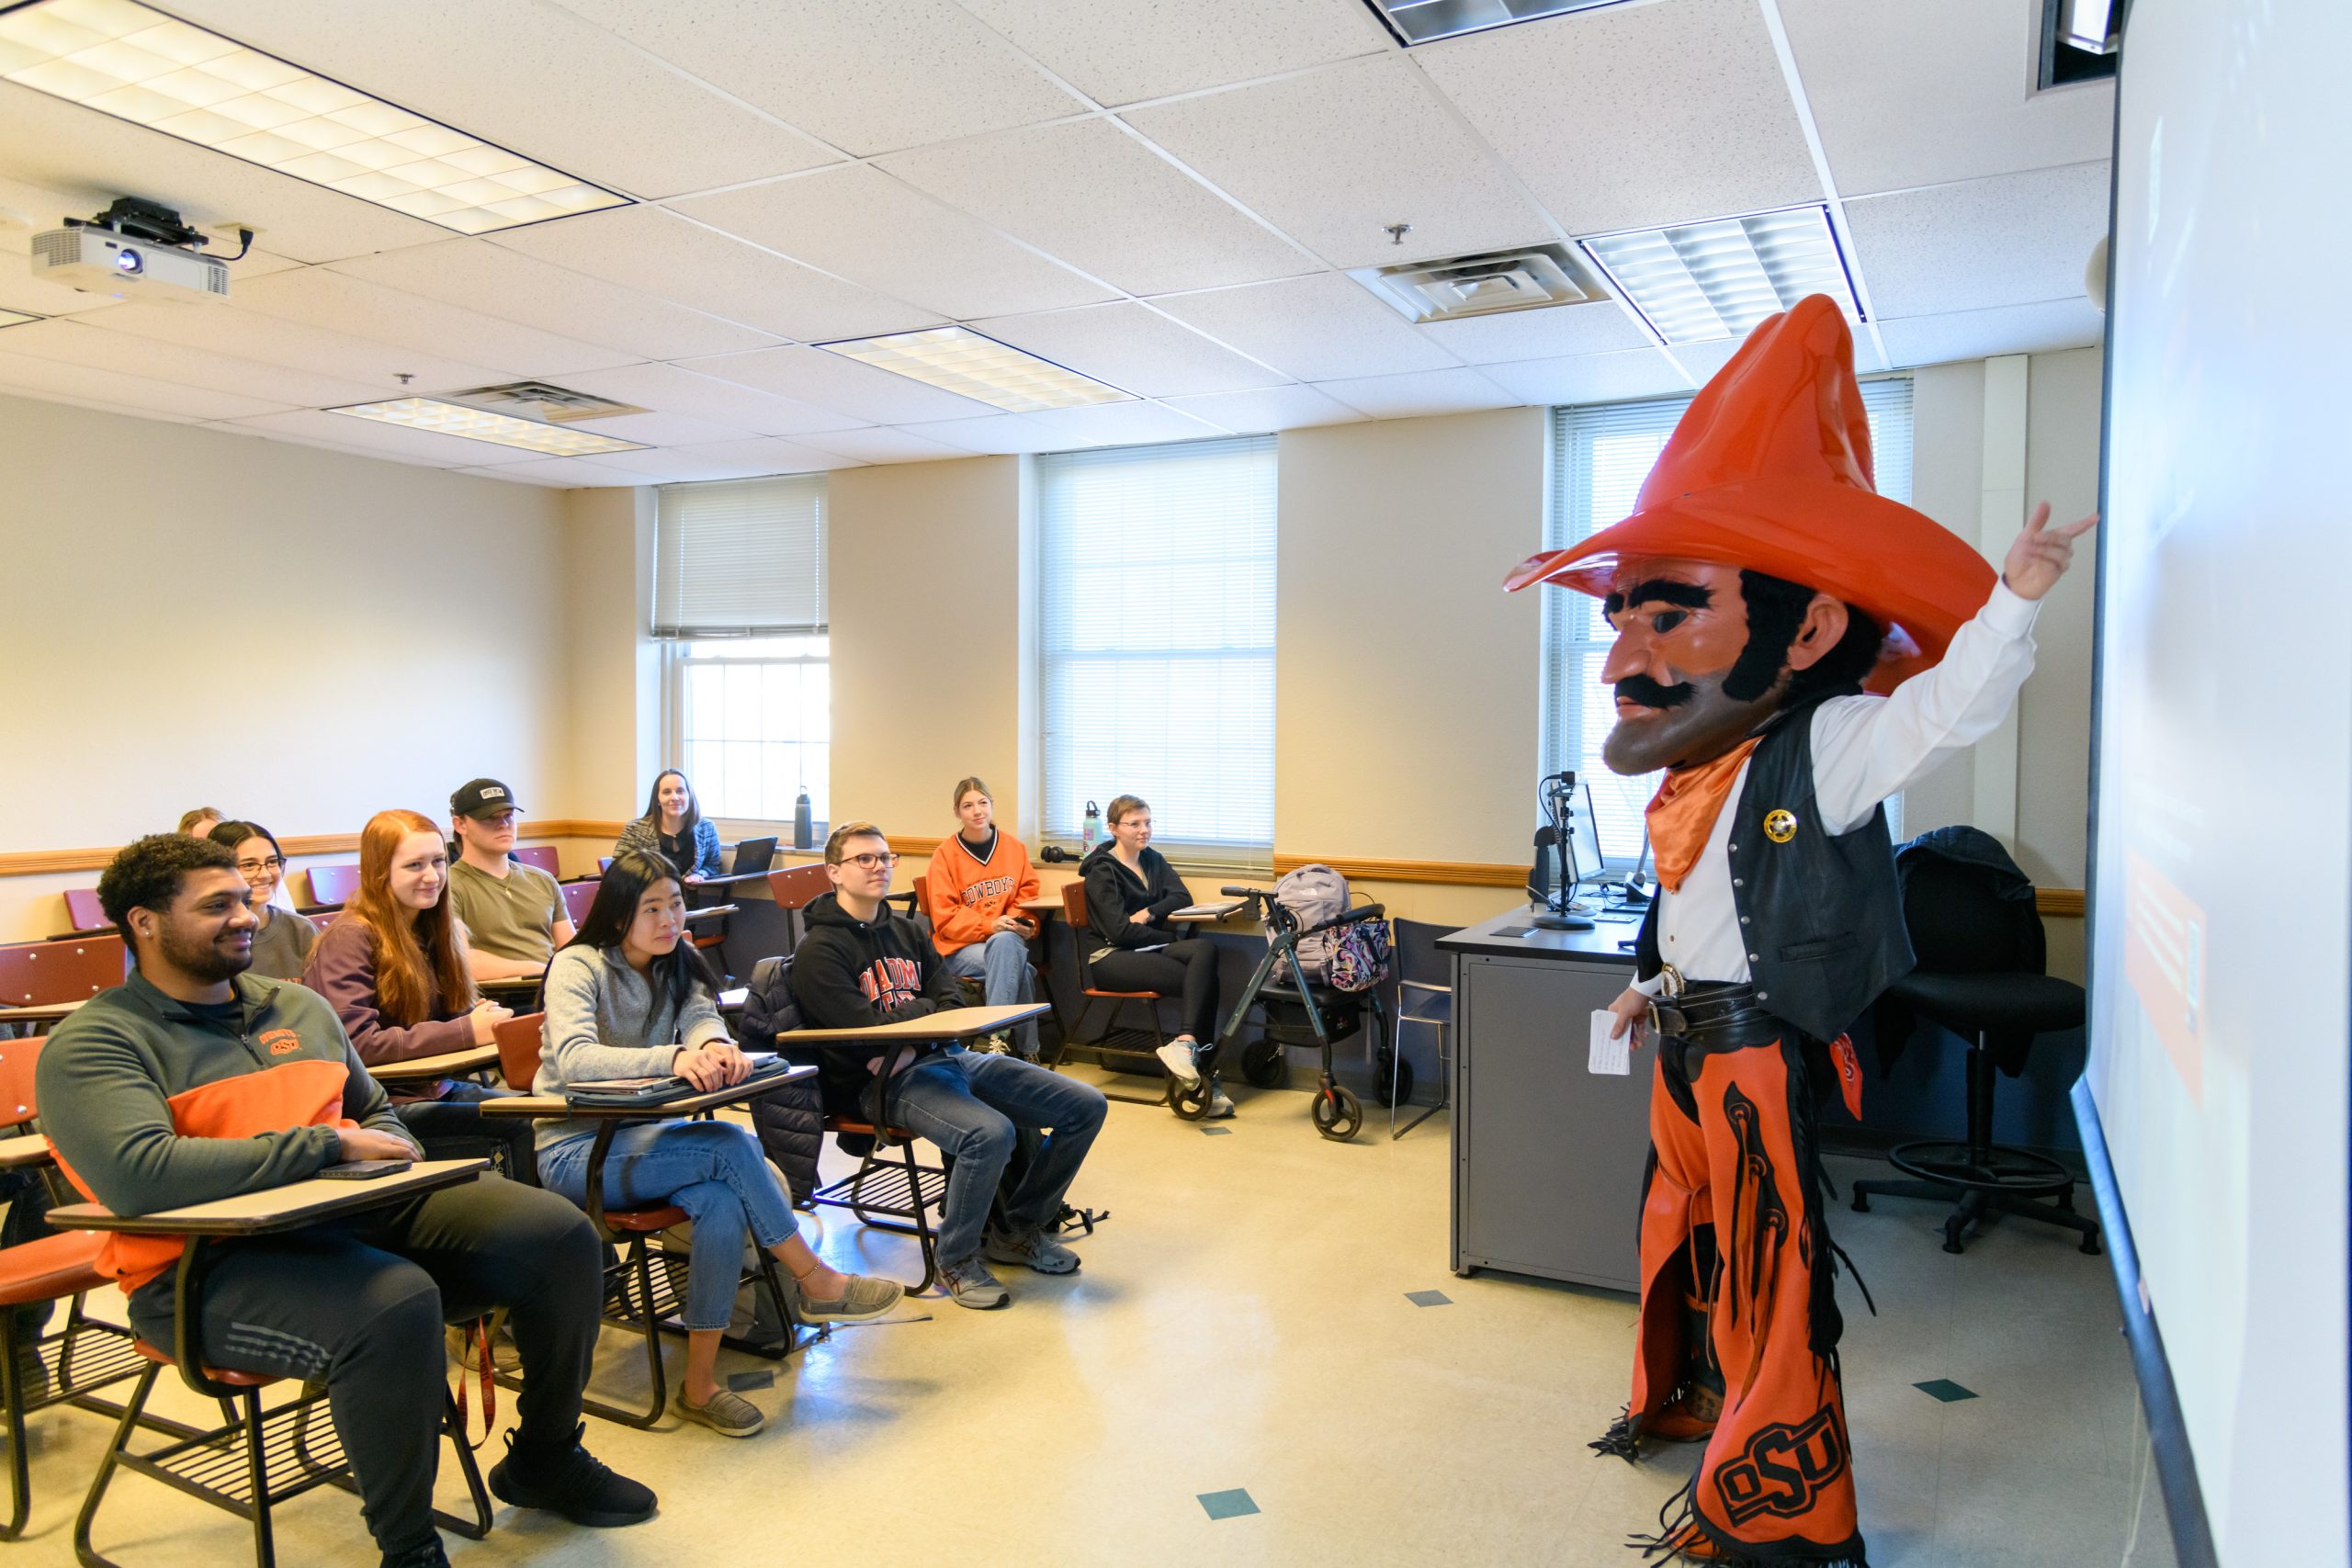 Pistol Pete standing in front of a classroom gesturing to the projector while students are being attentive